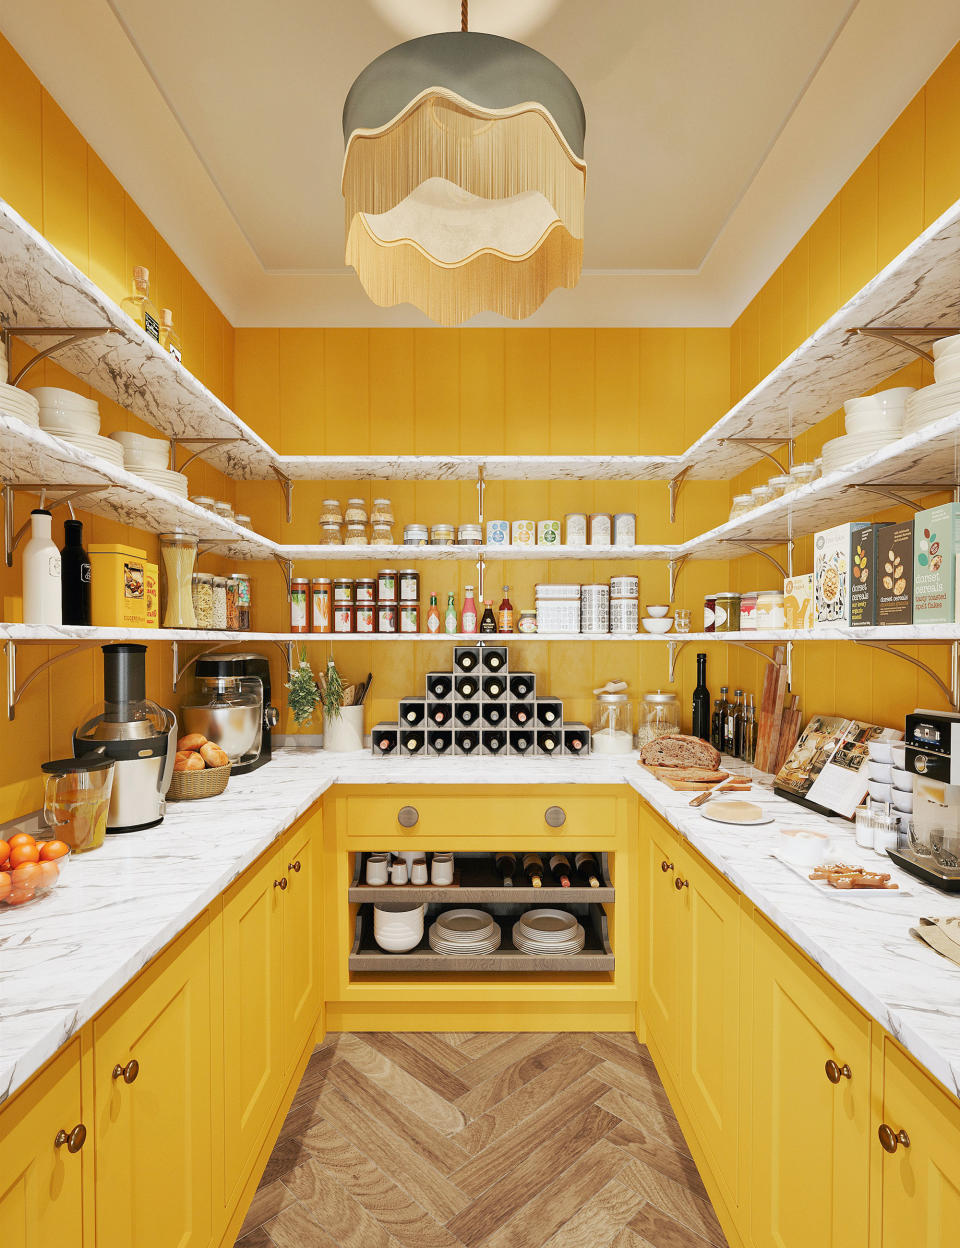 Pantry painted yellow with wall shelving